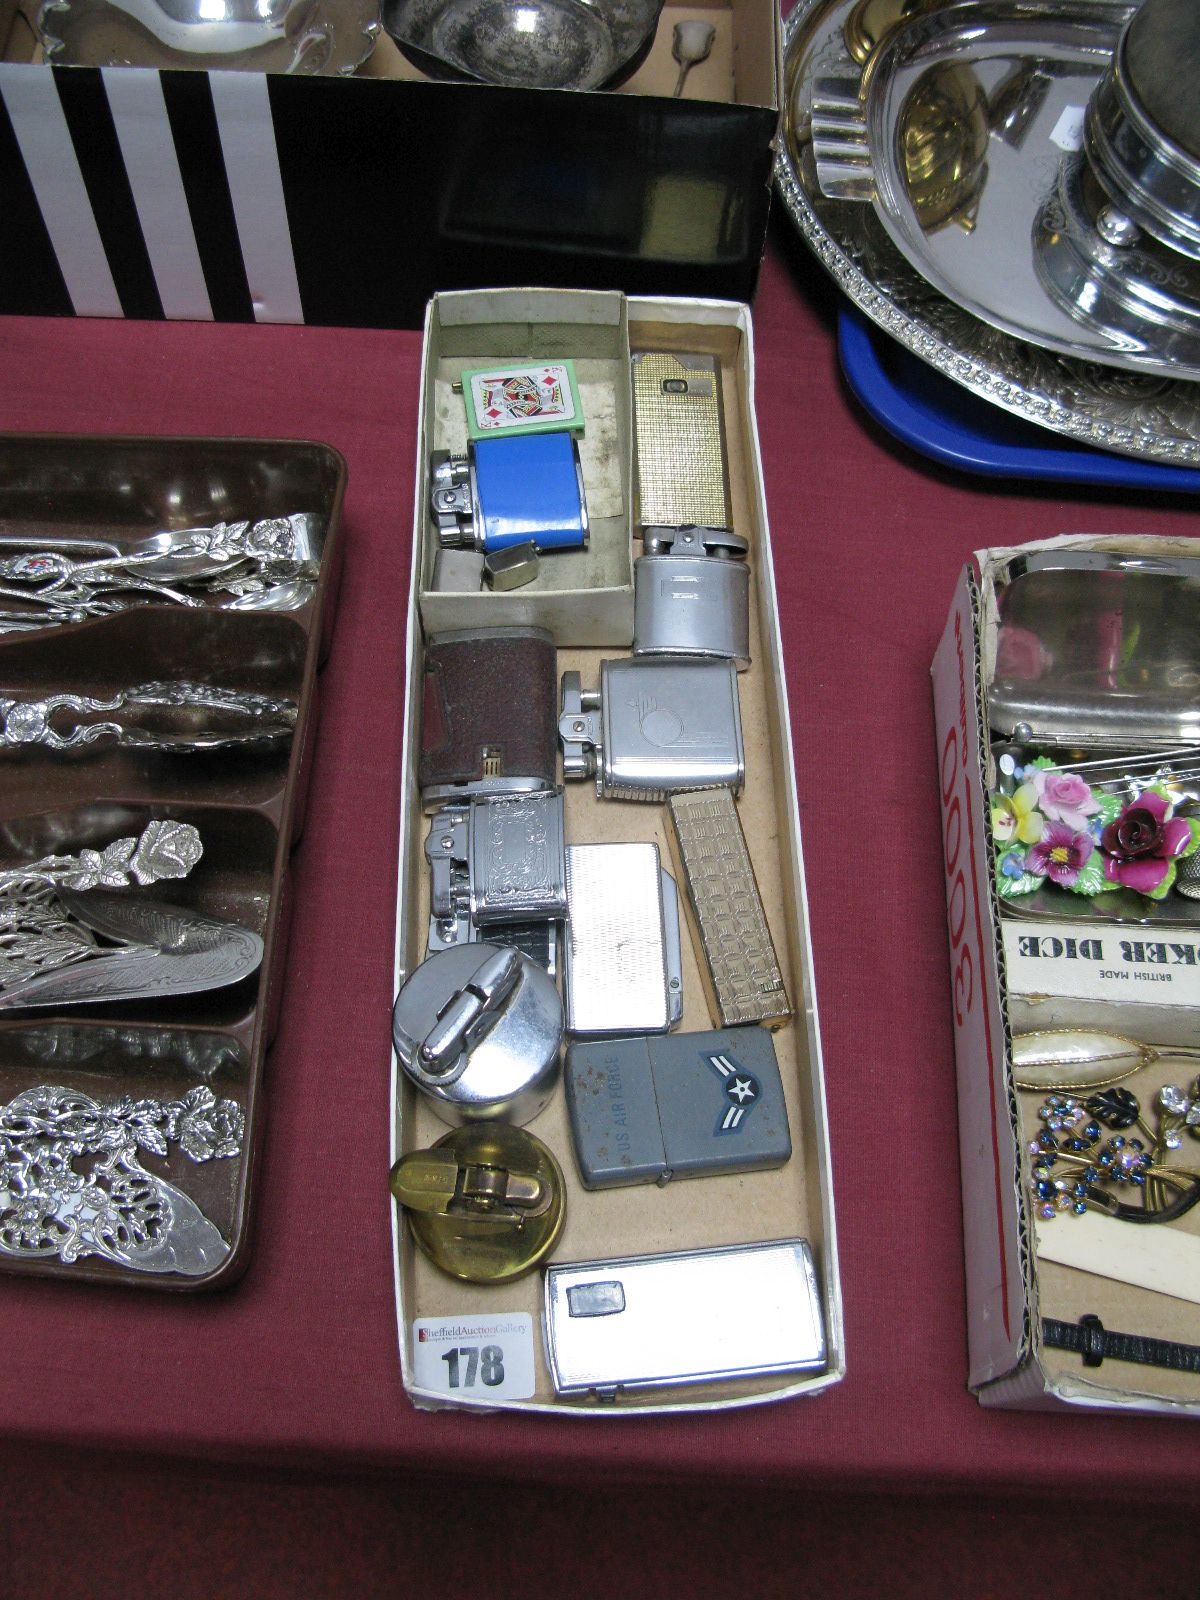 A Collection of Assorted Cigarette Lighters, including Ronson, Rolstar, Mosda "500", Colibri, etc.